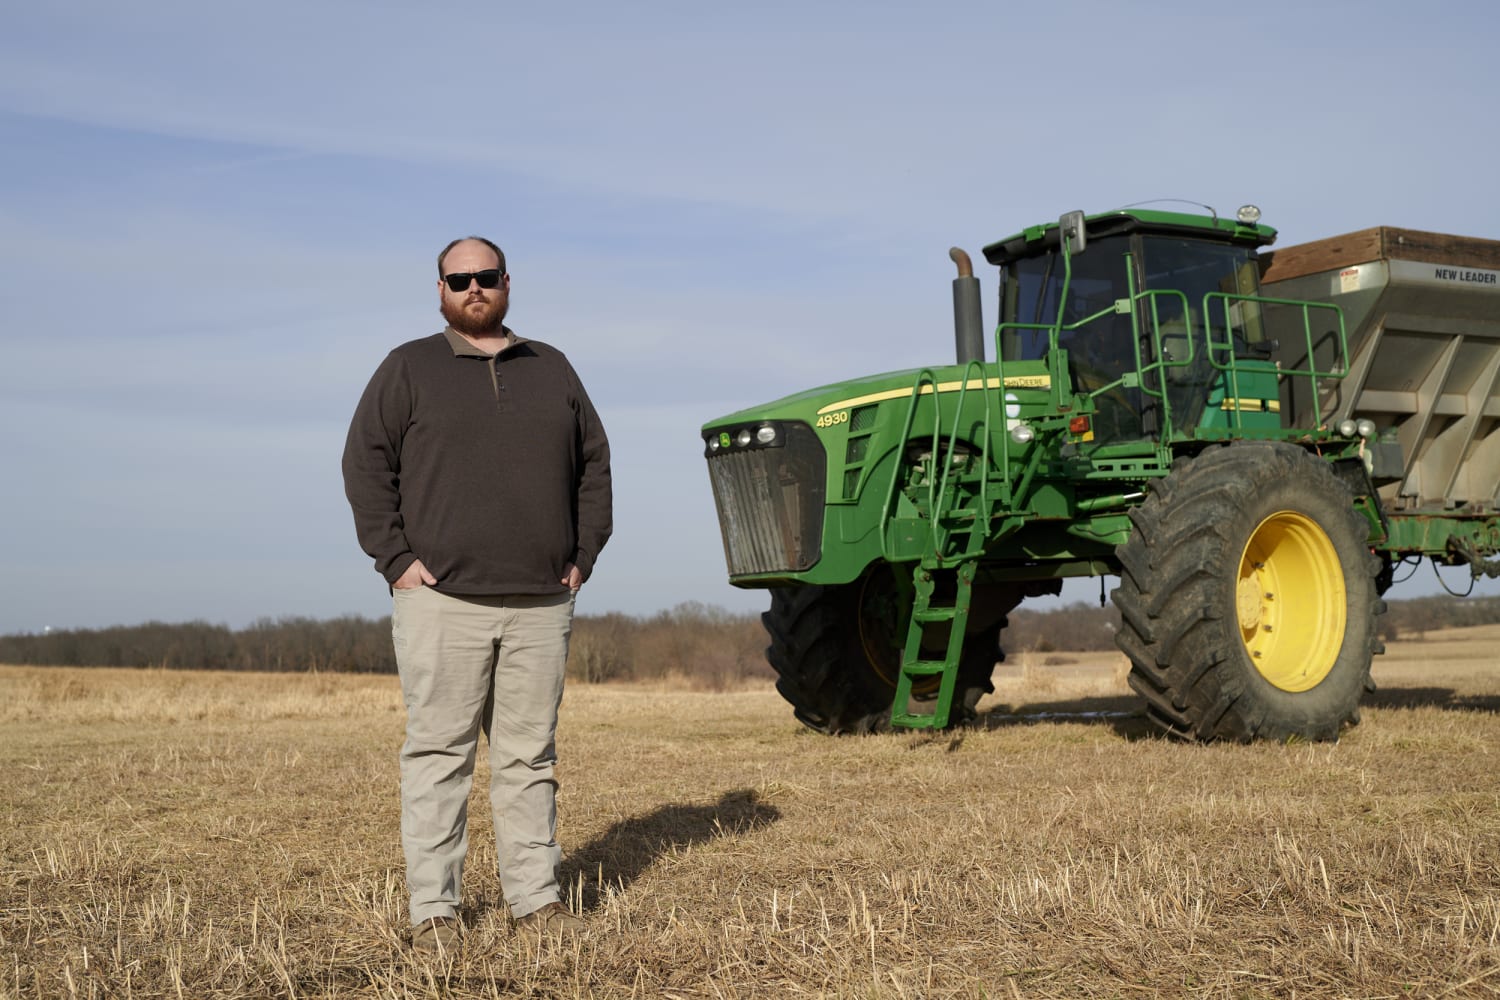 Farmers are hacking their tractors so they can actually fix them - CNET